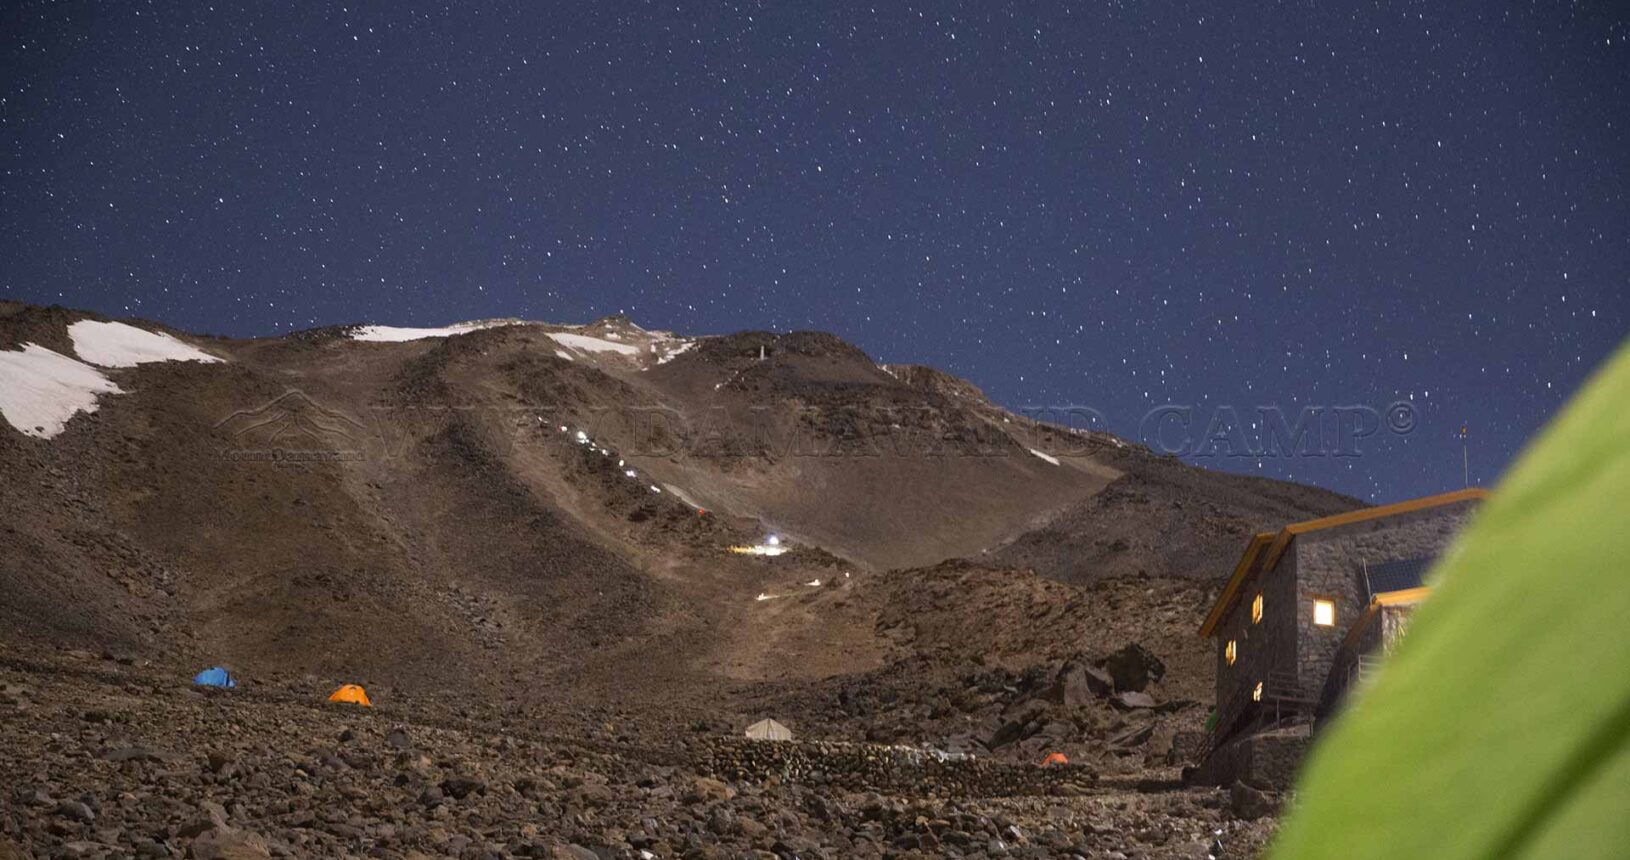 A breathtaking view of the night sky speckled with stars at Camp 3 of Mount Damavand.